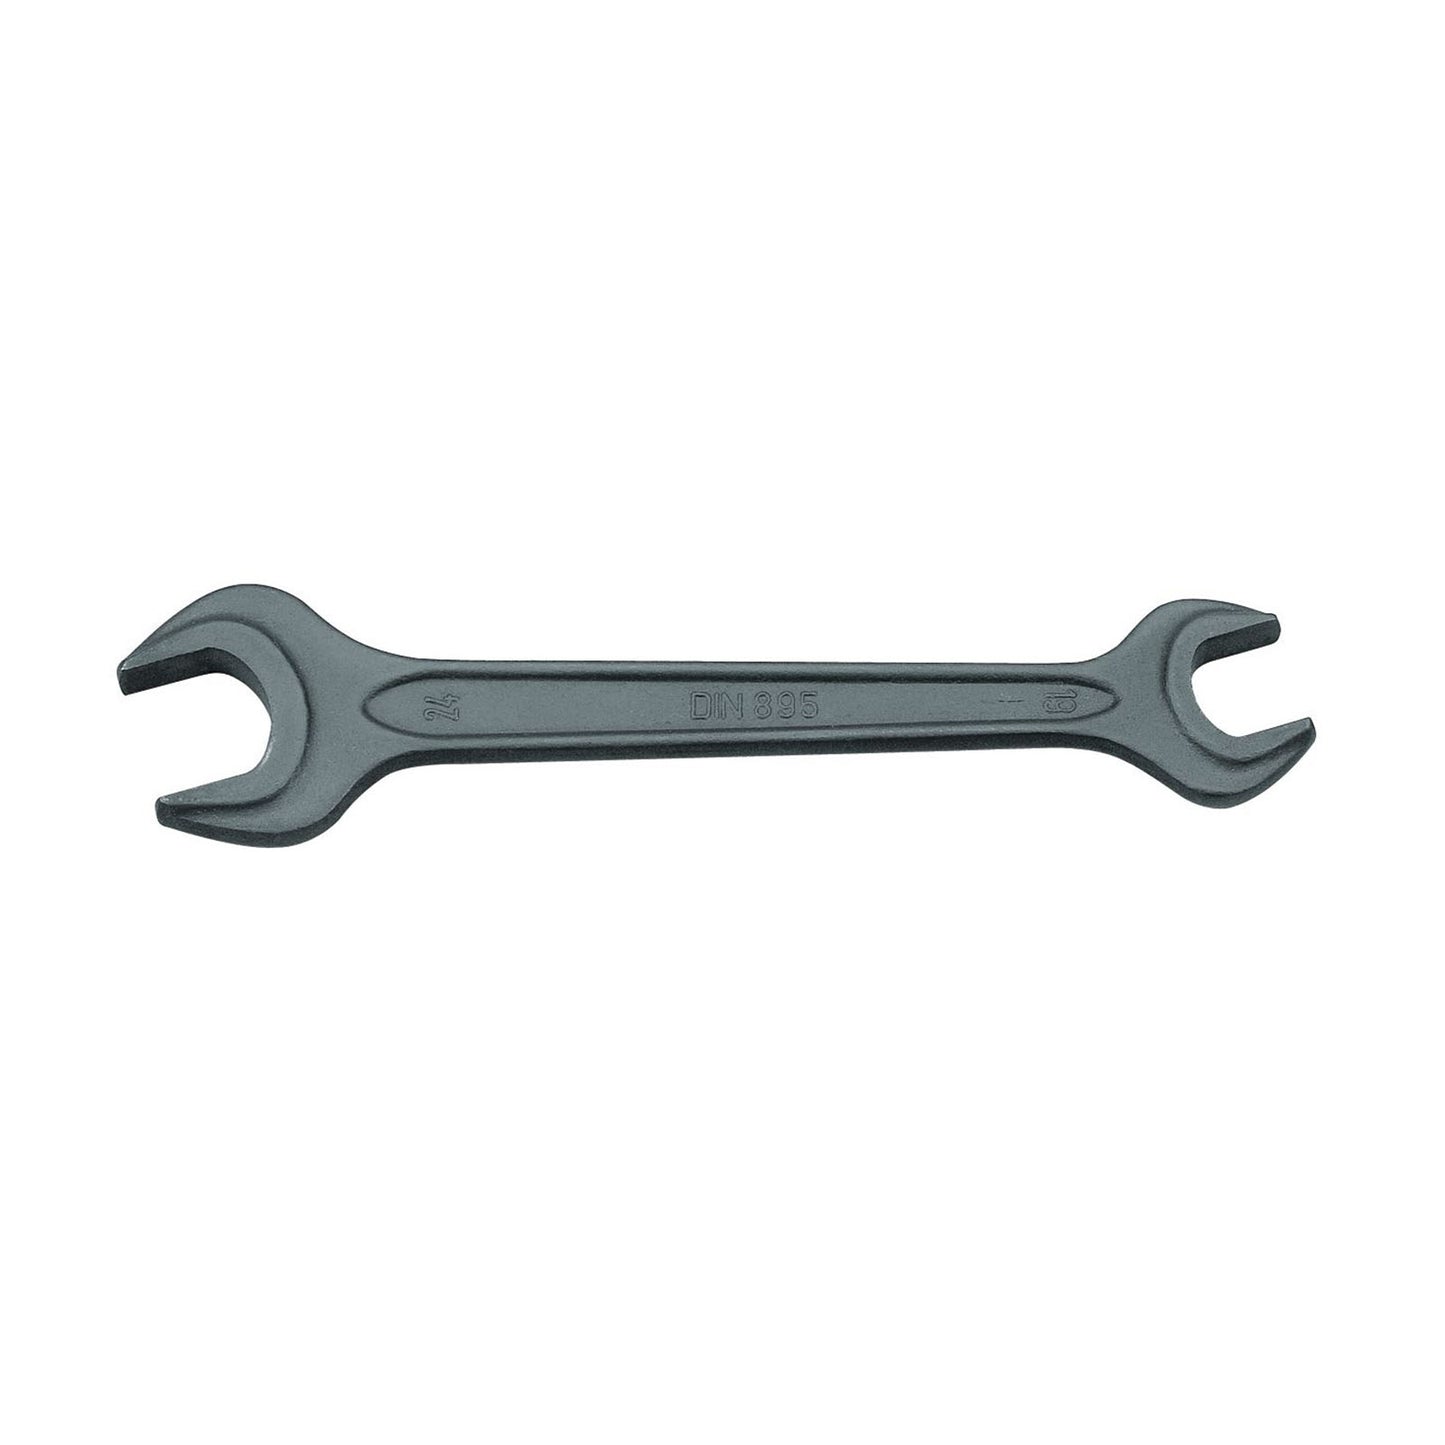 GEDORE 895 13X15 - 2-Mount Fixed Wrench, 13x15 (6585610)